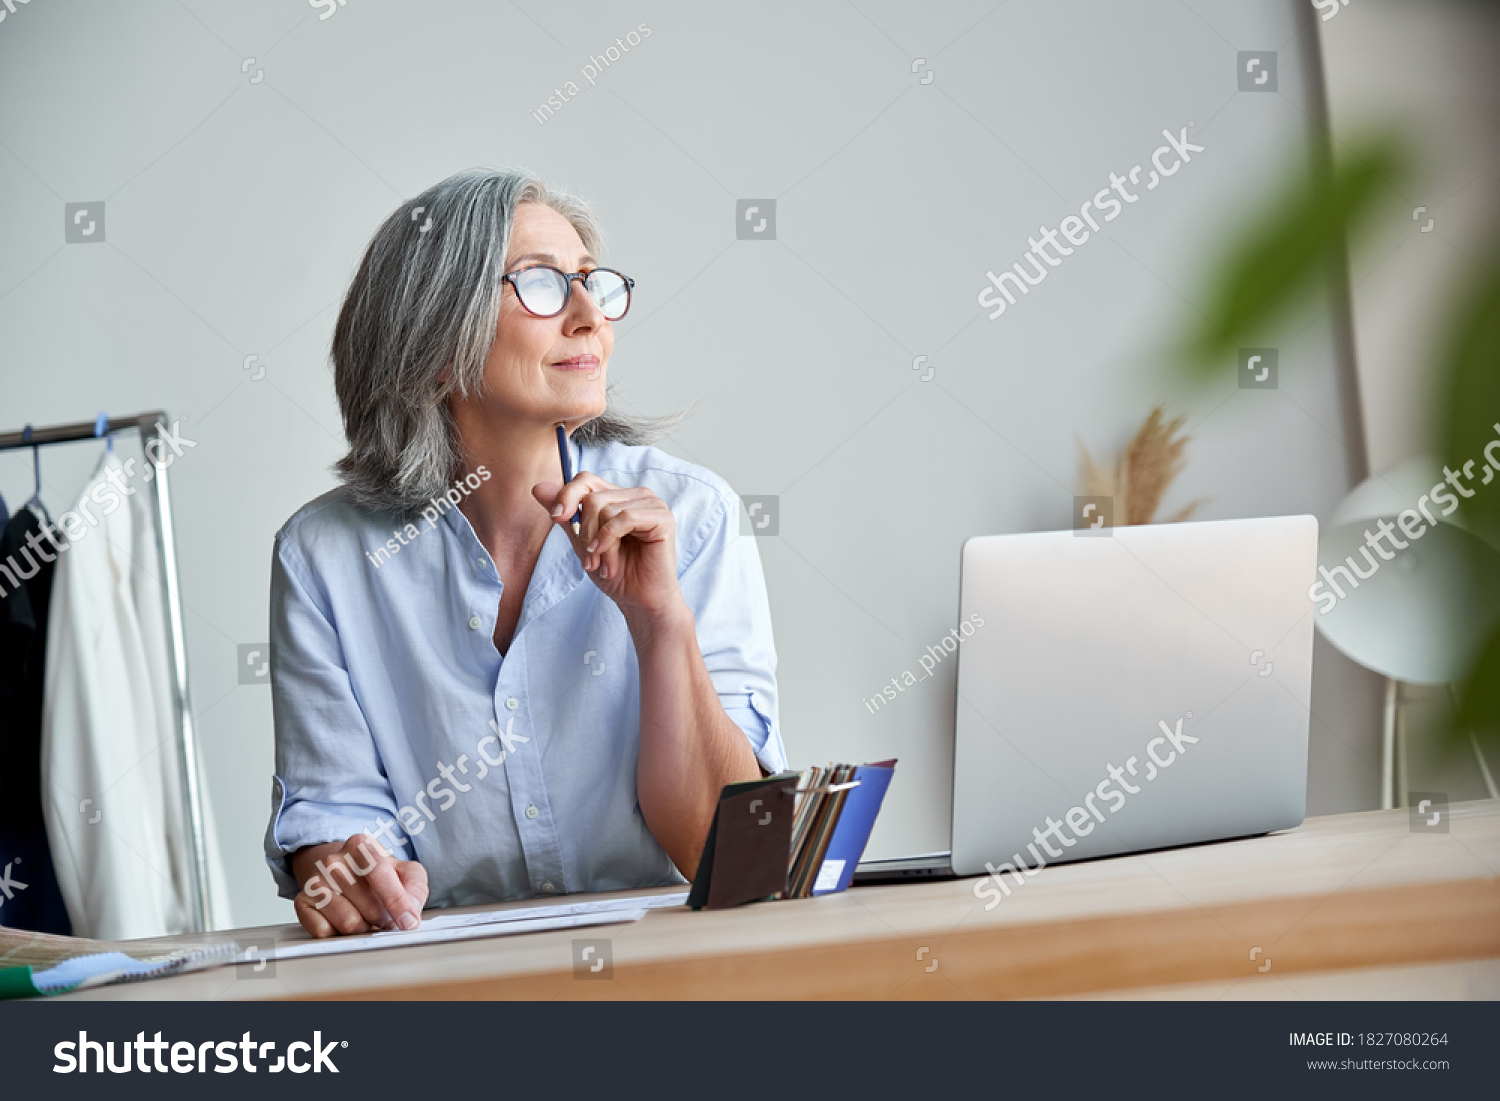 Inspired mature grey-haired woman fashion designer thinking on new creative ideas at workplace. Smiling beautiful elegant classy middle aged older lady small business owner dreaming in atelier studio. #1827080264